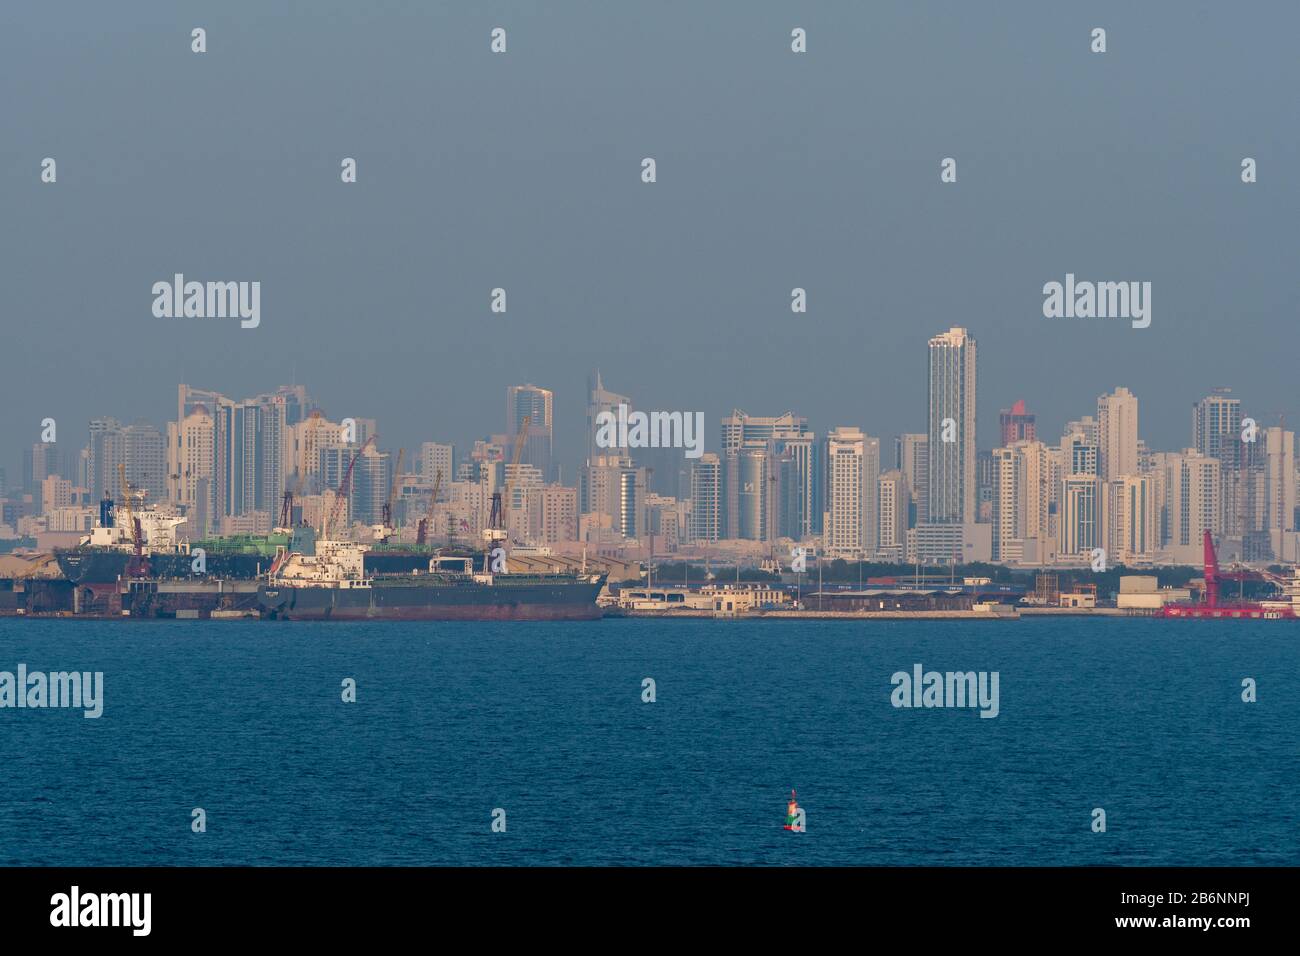 View over the Ocean to the Manamah skyline in Bahrain Stock Photo